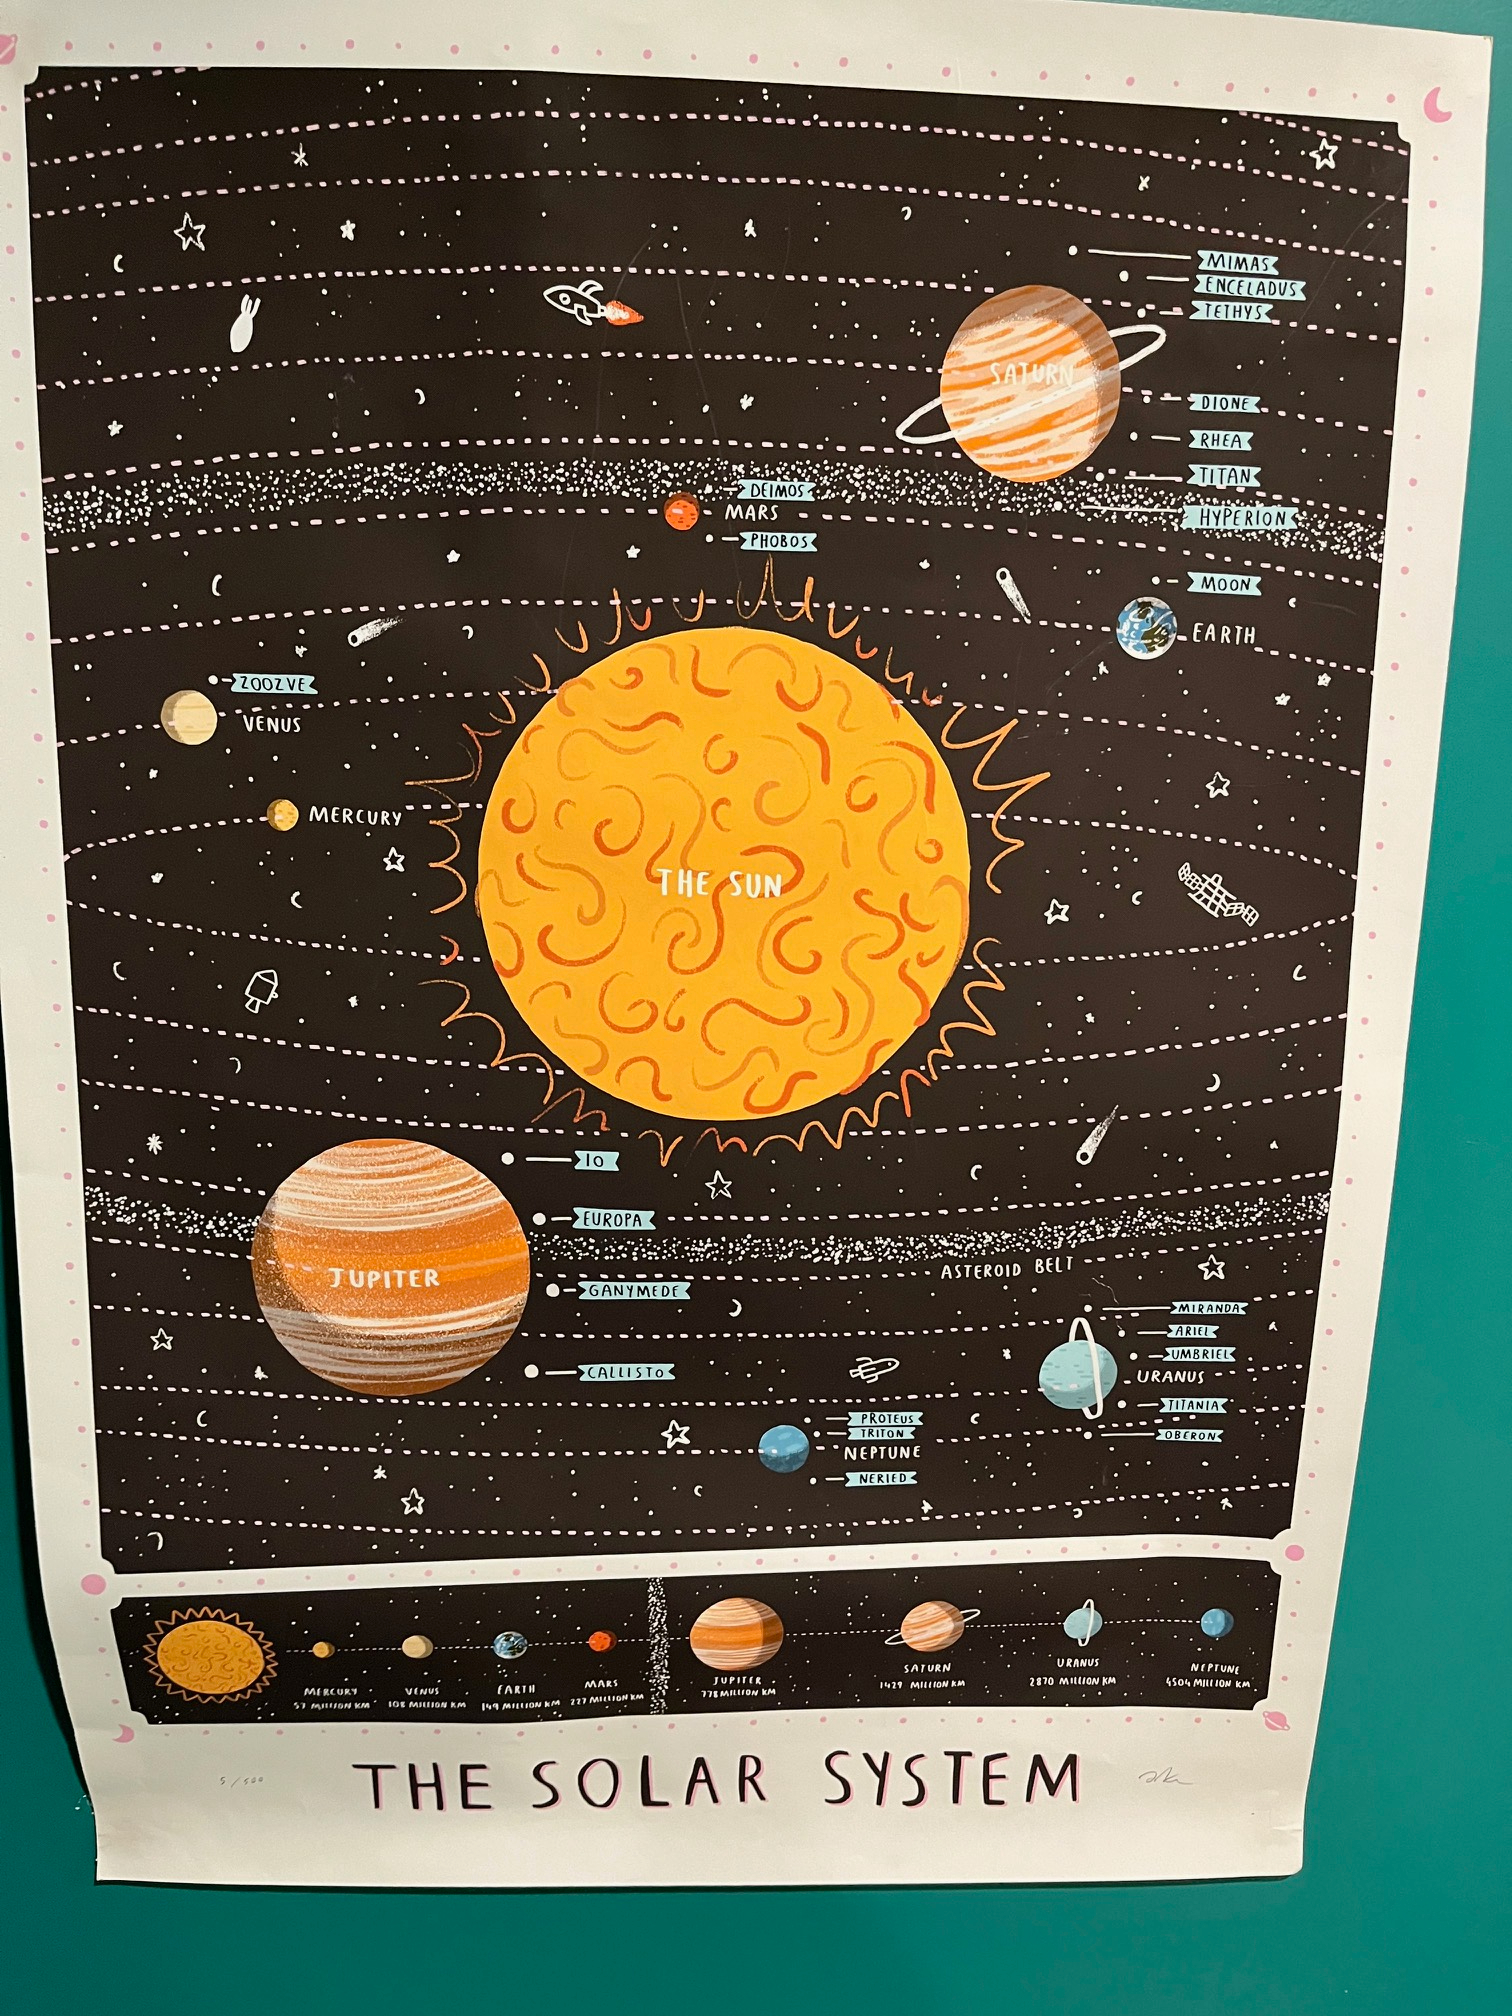 an artistic poster of the solar system showing a large sun and planets with their moons. curved dotted lines cross the poster to represent planetary orbits.